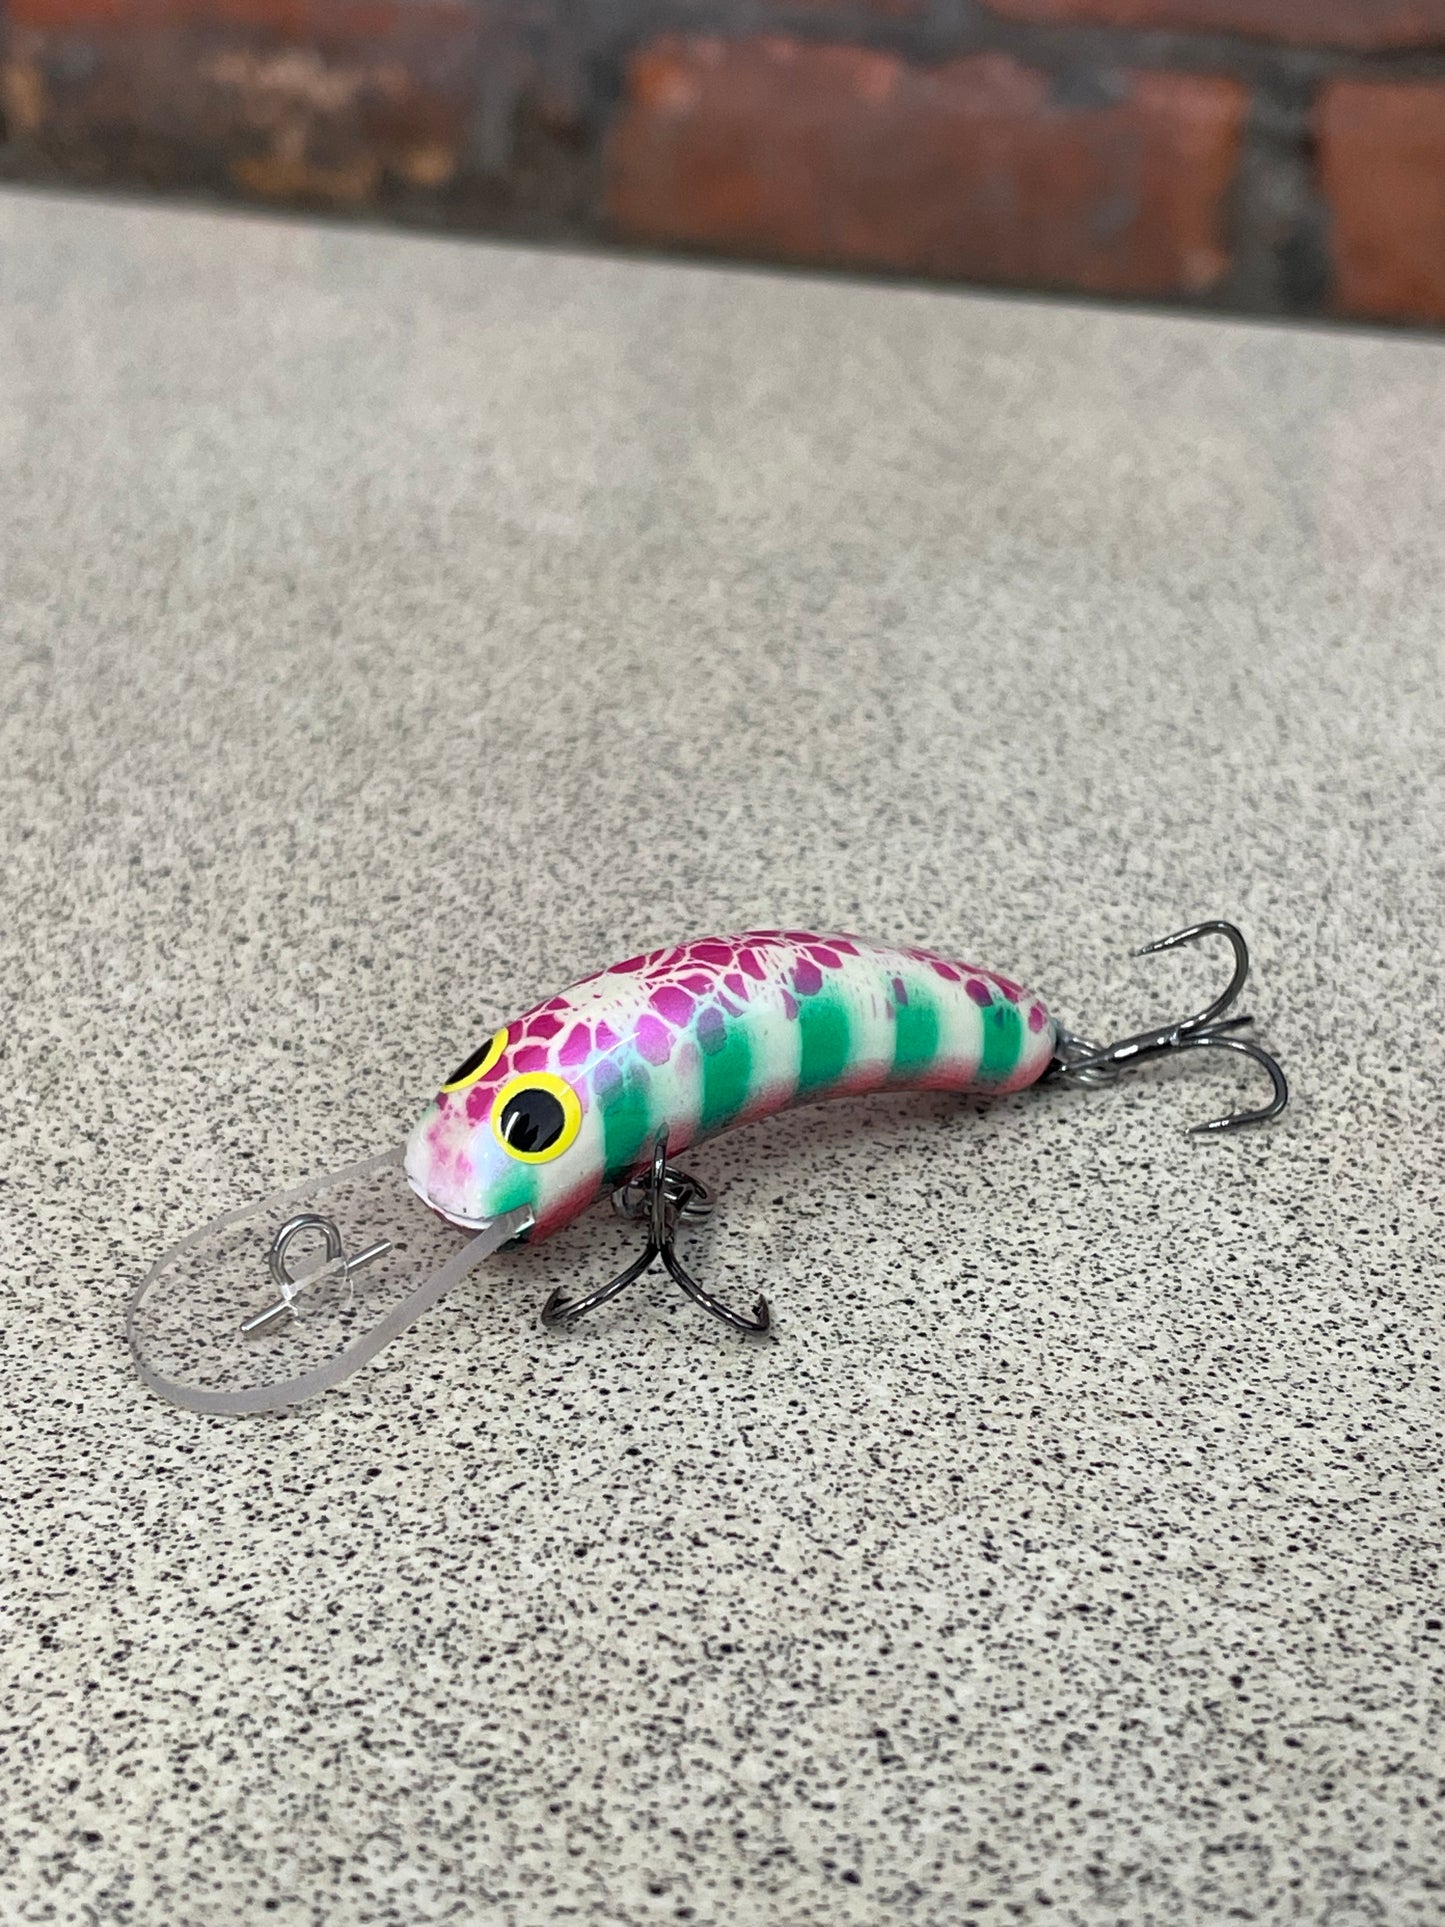 Australian Crafted Lures - Slim Invader 50mm 7ft (Alpine Candy)